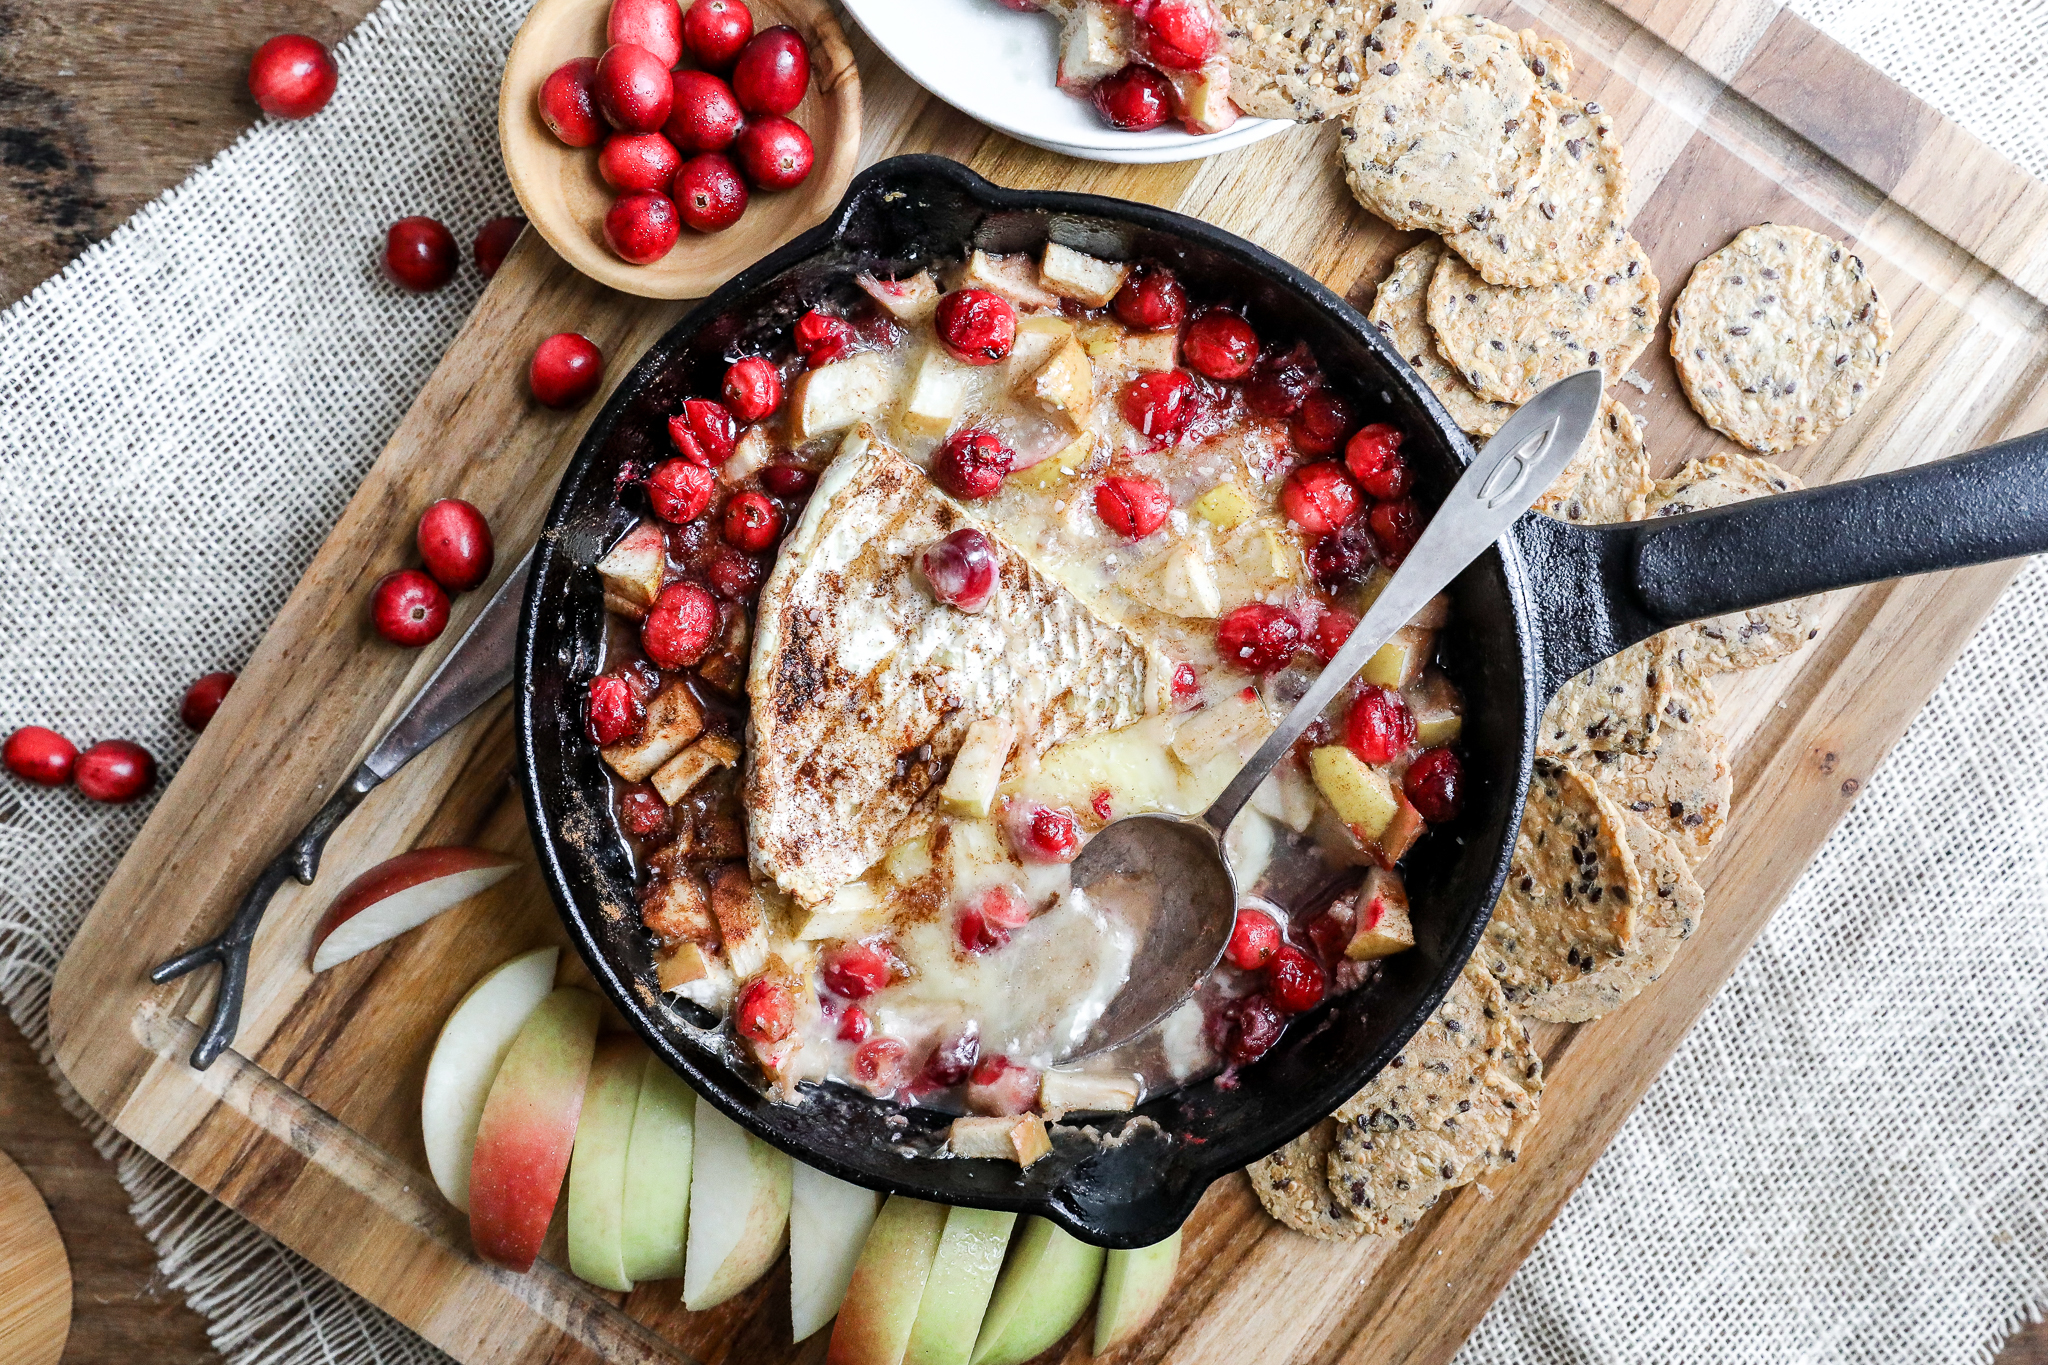 An image of cranberry Baked Brie